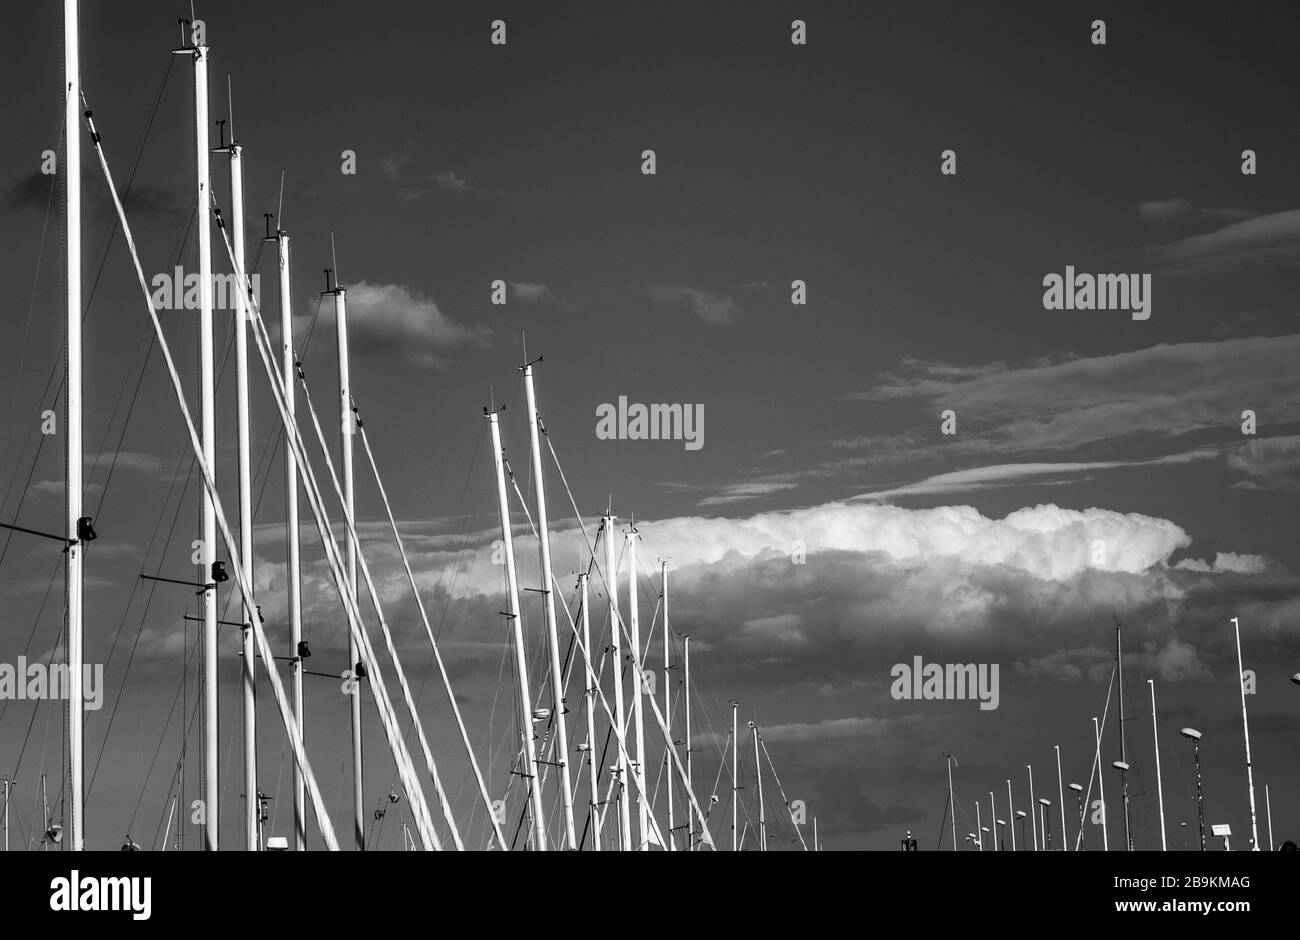 Masts of yachts moored in yacht haven Marina Gdynia on Gdansk Bay in Baltic Sea, Gdynia Poland - monochrome image Stock Photo